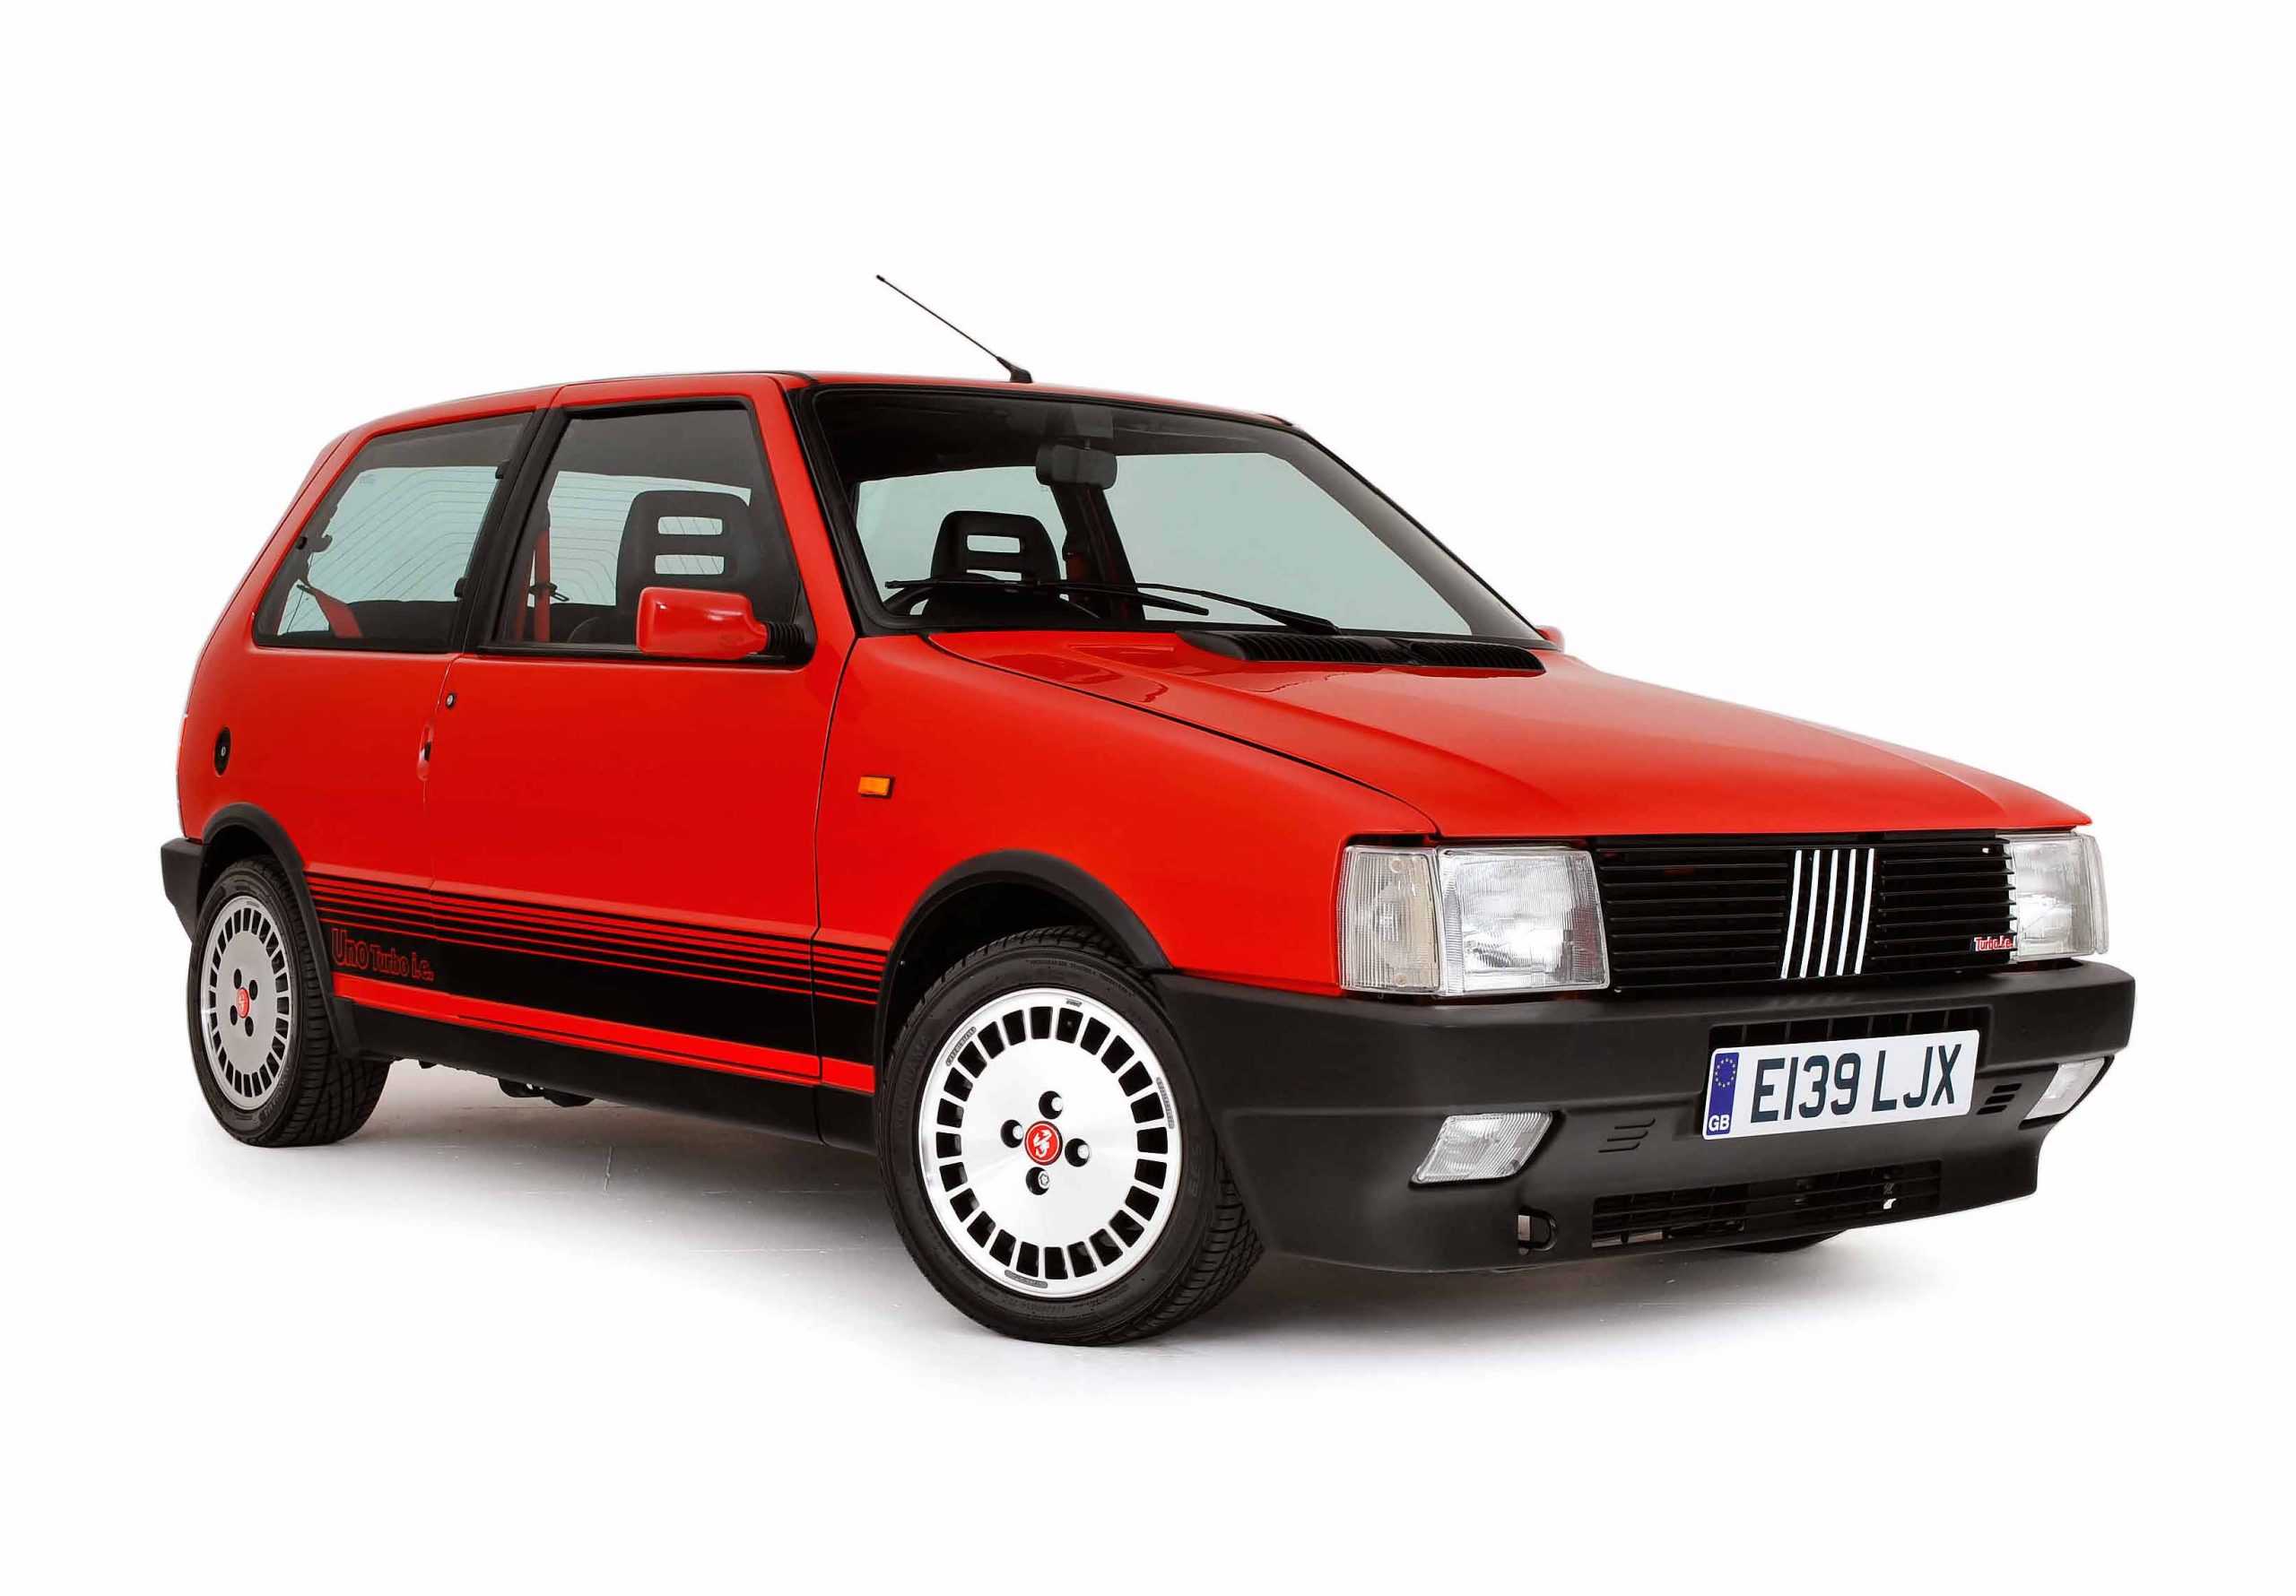 Buyers' Guide Fiat Uno Turbo Type 146 Mk1 and Mk2 - Drive